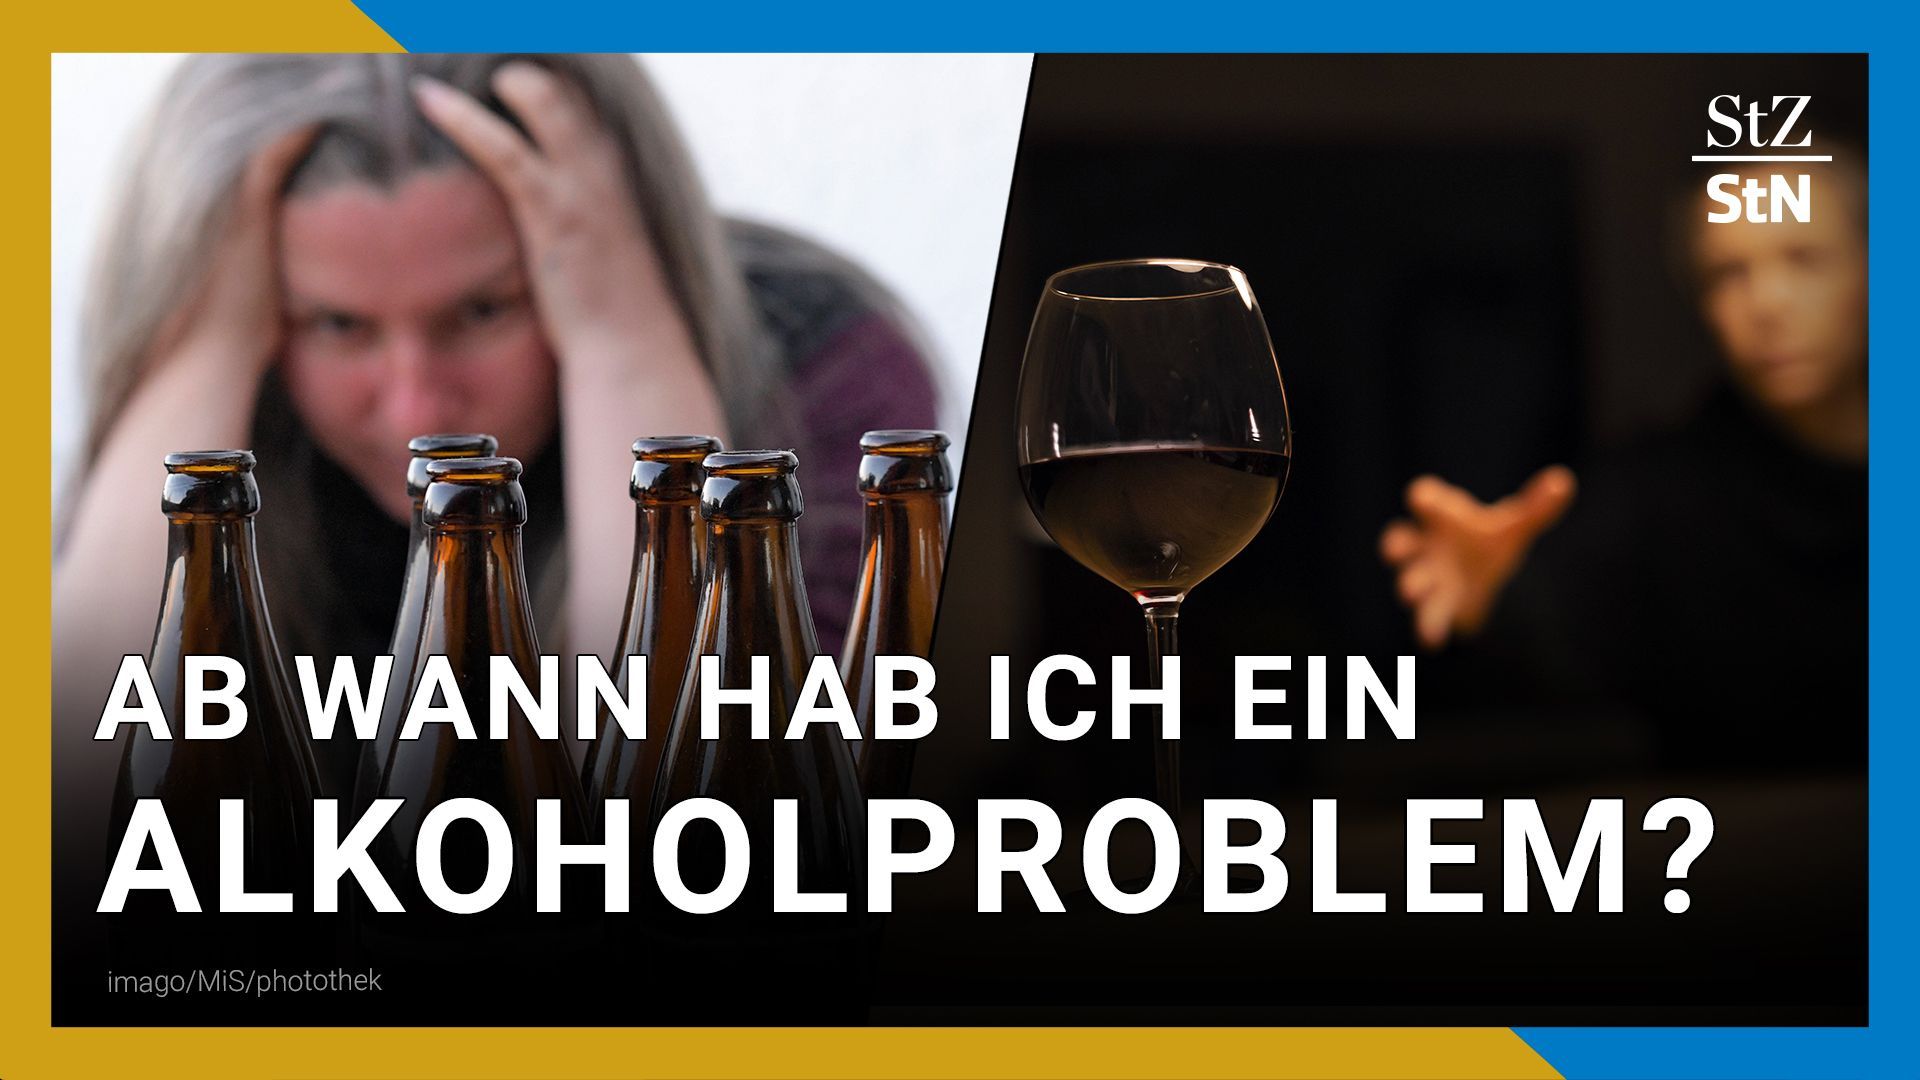 Alcohol: signs of problematic consumption of the popular drug